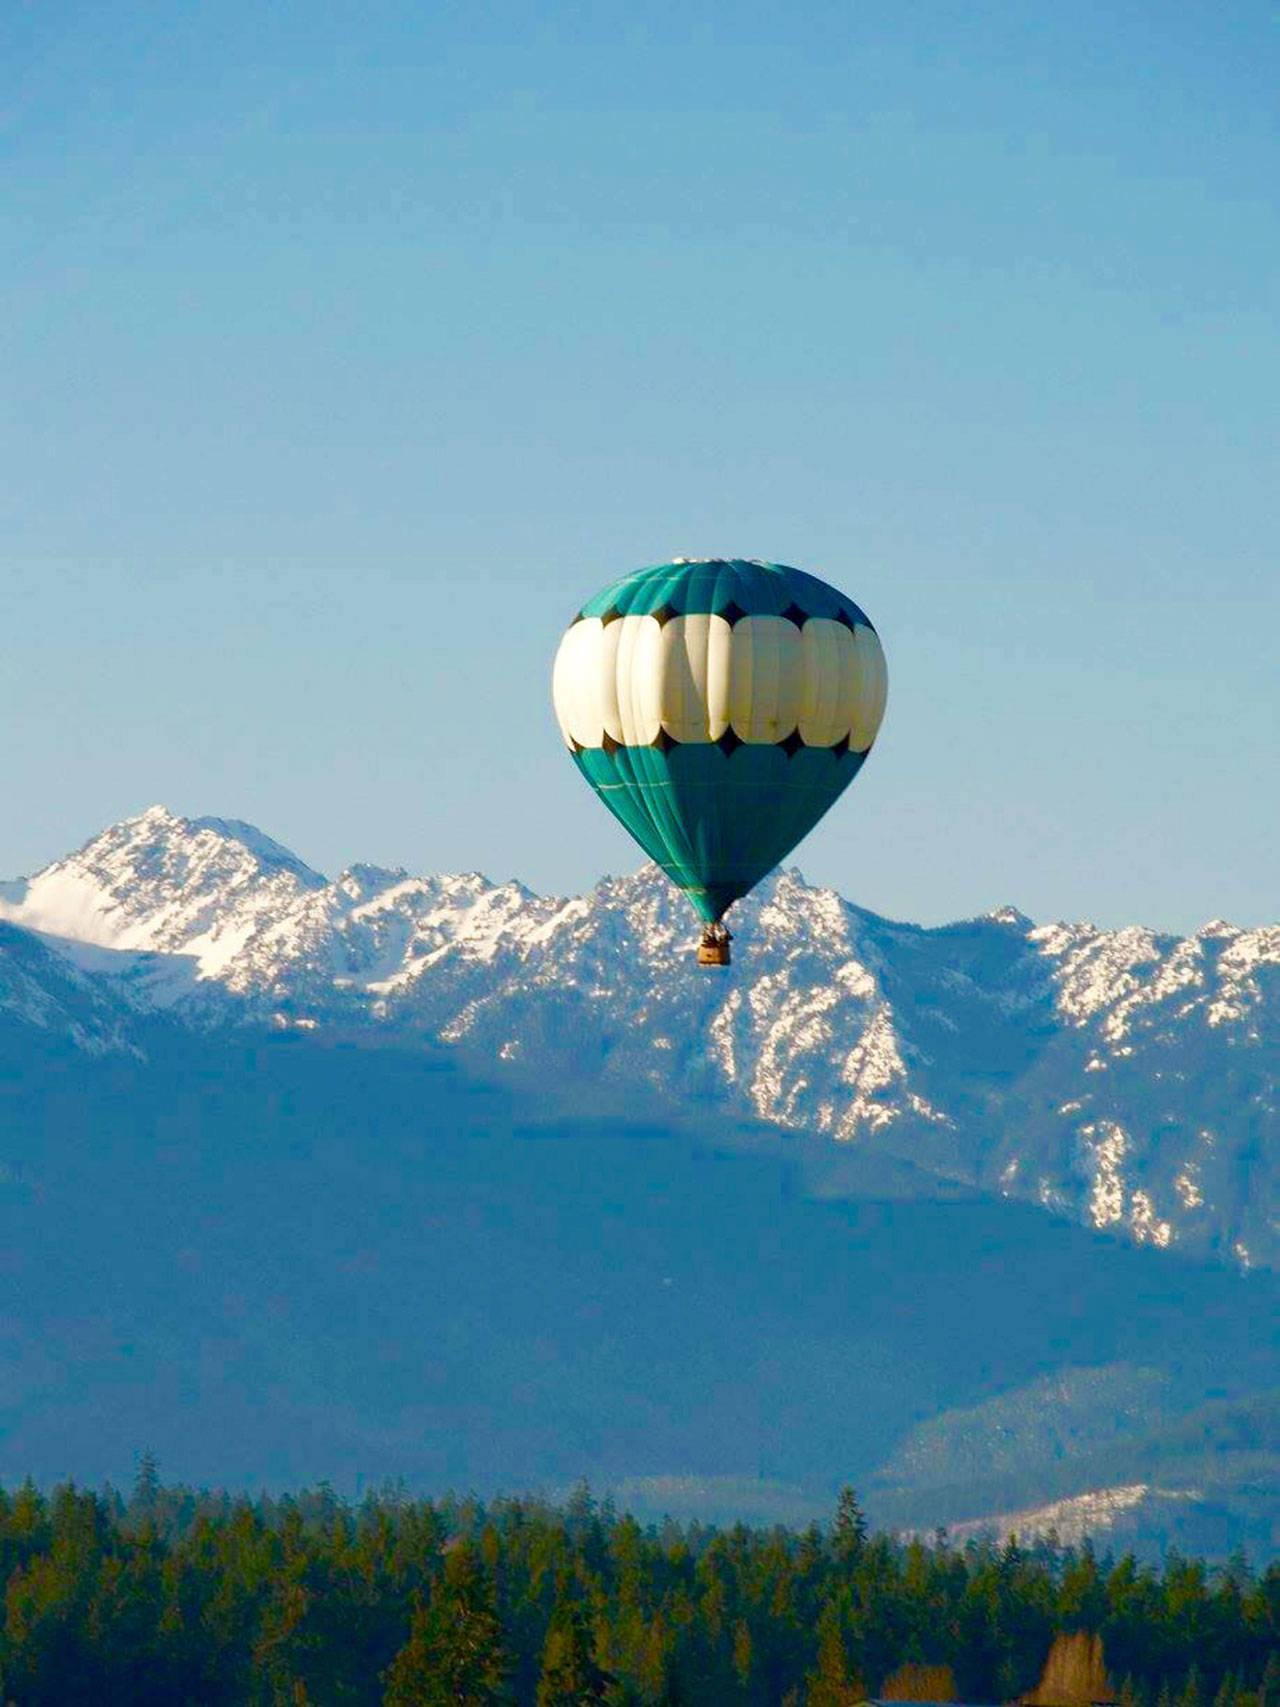 Up to seven hot air balloons, including Captain Crystal Stout’s balloon, pictured, could be flying over Sequim for Aug. 26-27, but organizers of the Olympic Peninsula Air Affaire need at least three-four passengers each day to make it viable. (Morning Star Balloon Co.)